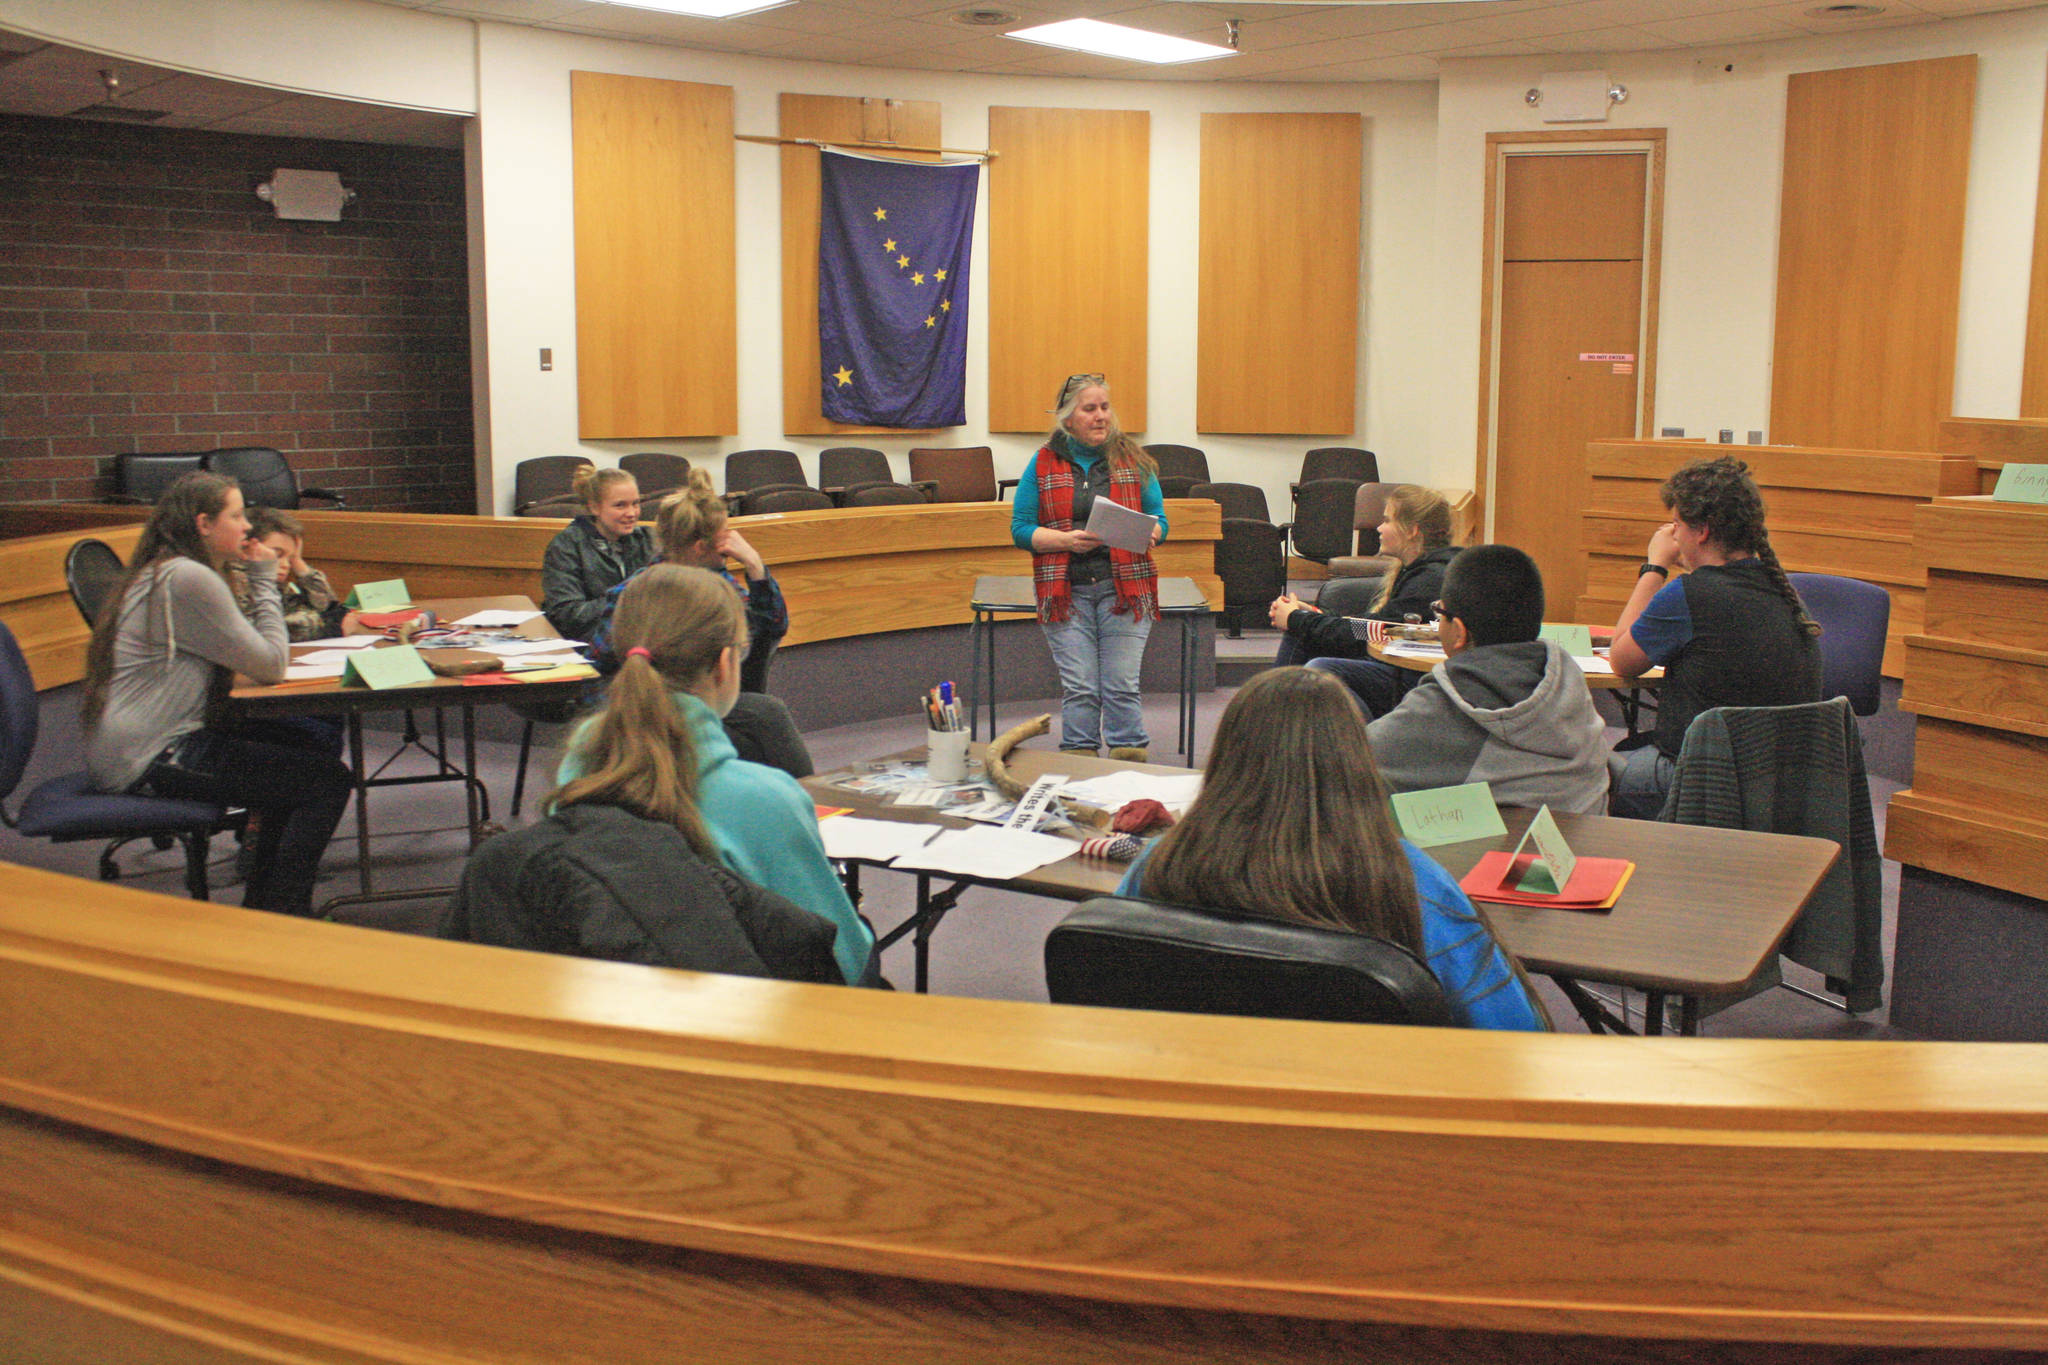 Students attend a Kenai Peninsula Youth Court training session prepping them for roles as judges, attorneys and clerks on the court. The court offers youth facing certain misdemeanor charges to have their cases heard by peers. (Photo by Erin Thompson/Peninsula Clarion)